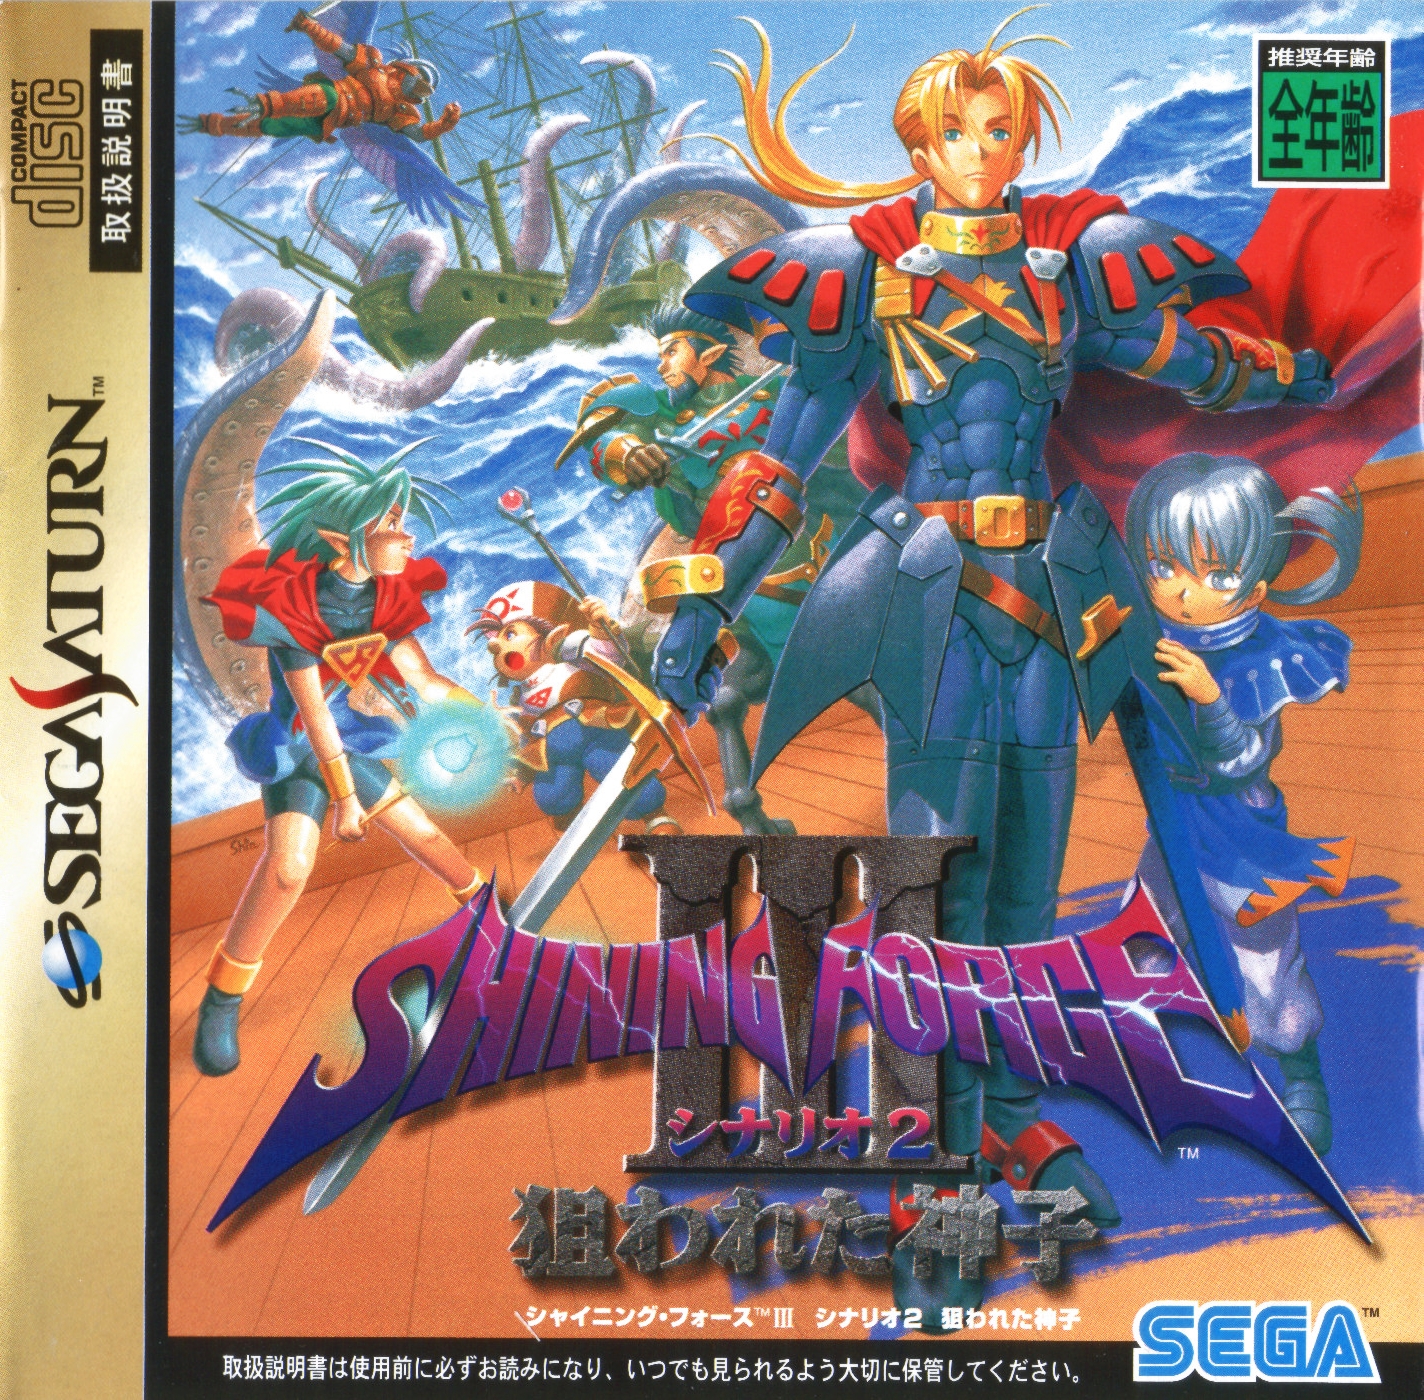 shining force 3 trilogy patch